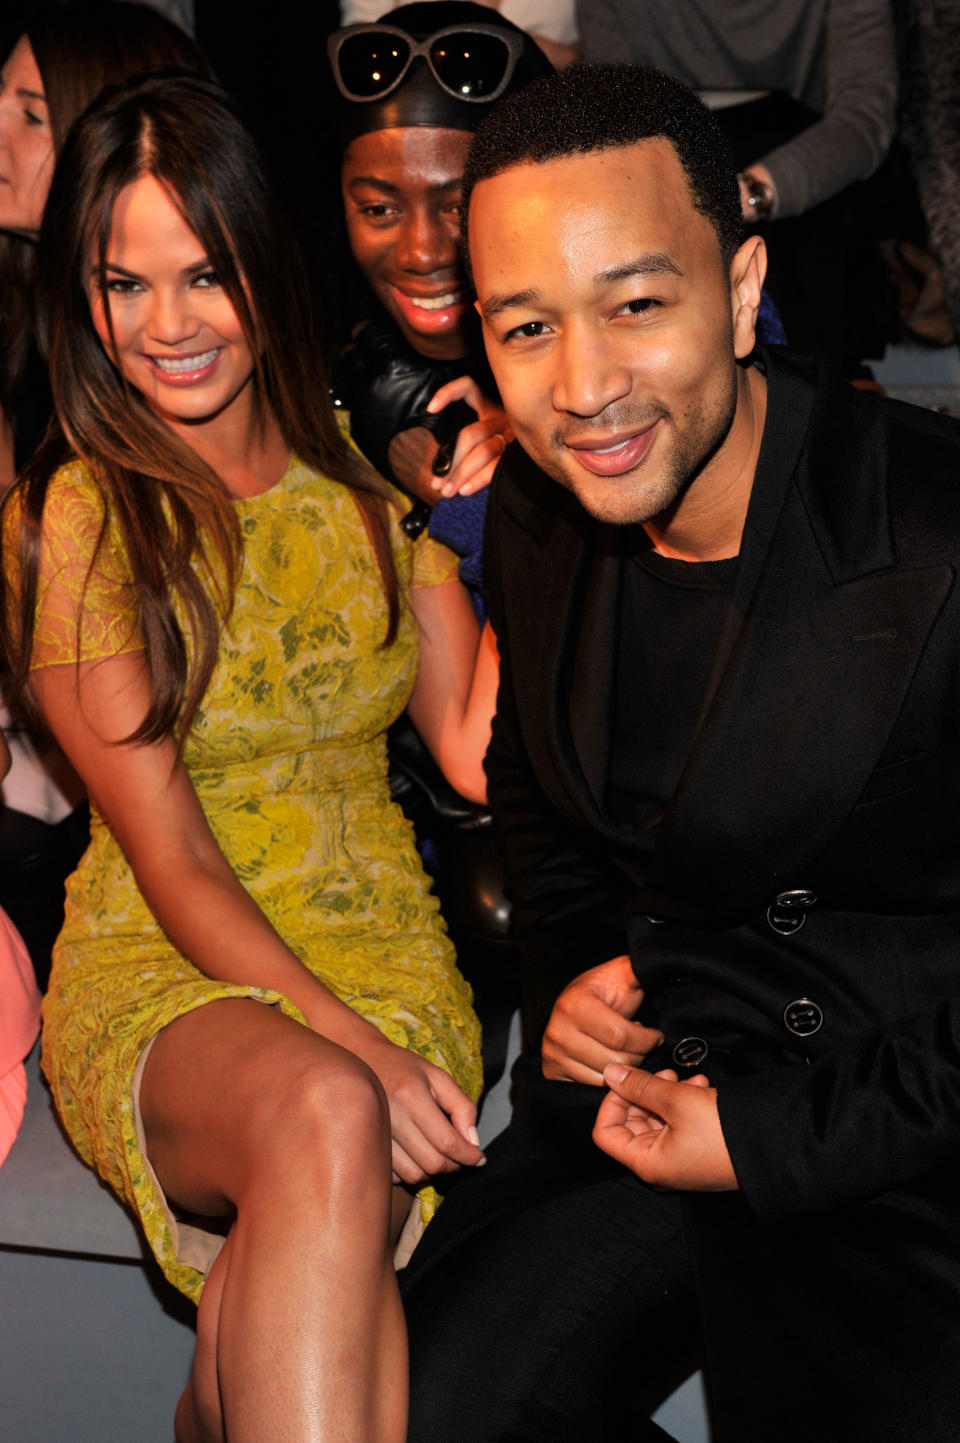 NEW YORK, NY - FEBRUARY 12:  Model Chrissy Teigen and singer John Legend attend the Vera Wang Fall 2013 fashion show during Mercedes-Benz Fashion Week at The Stage at Lincoln Center on February 12, 2013 in New York City.  (Photo by Stephen Lovekin/Getty Images for Mercedes-Benz Fashion Week)